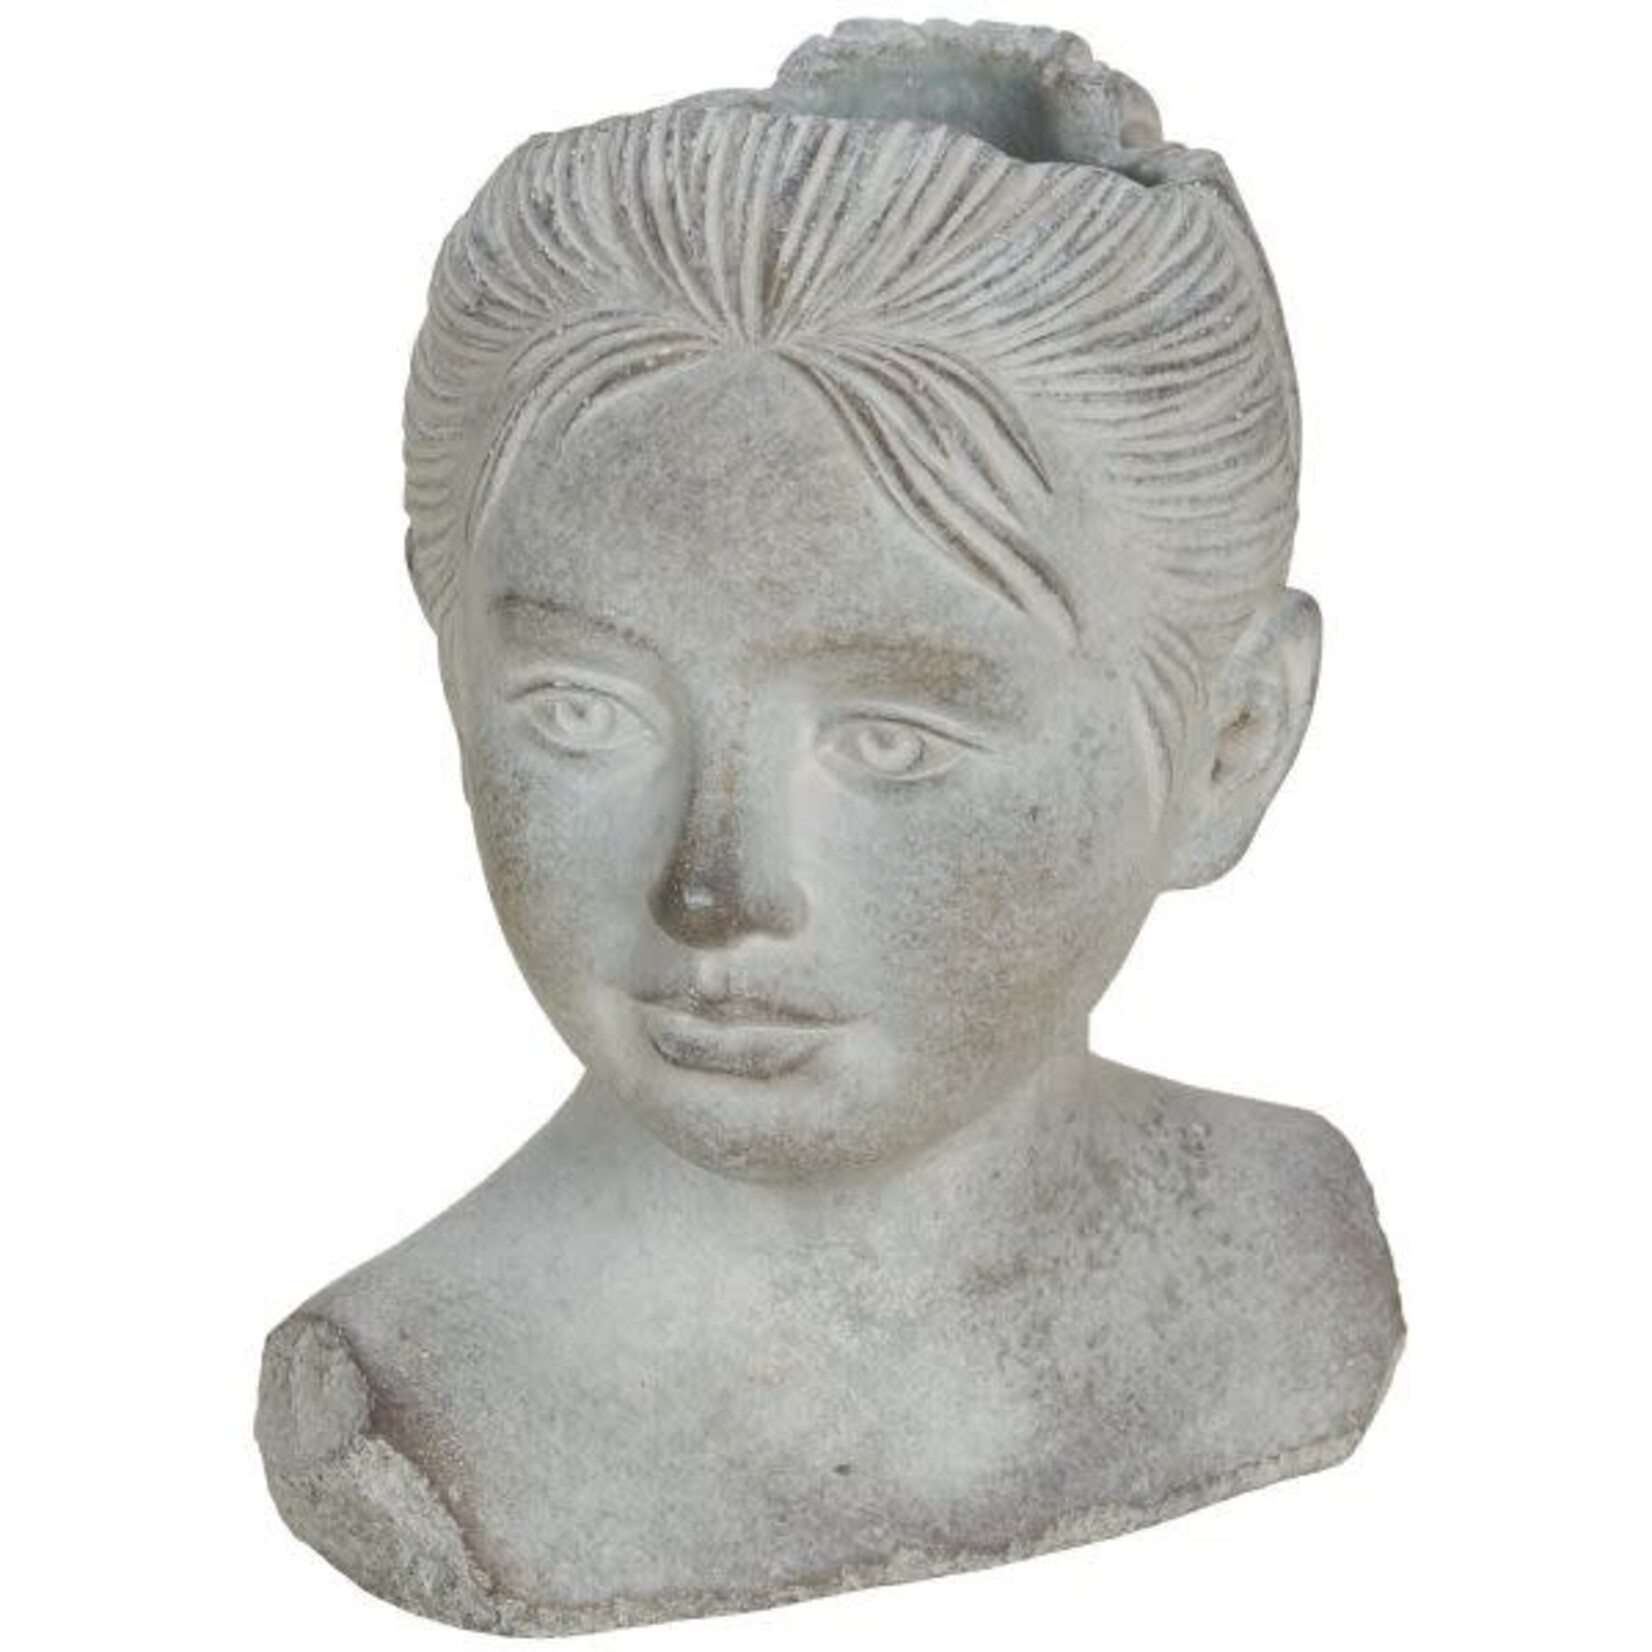 9" CEMENT YOUNG GIRL STATUE